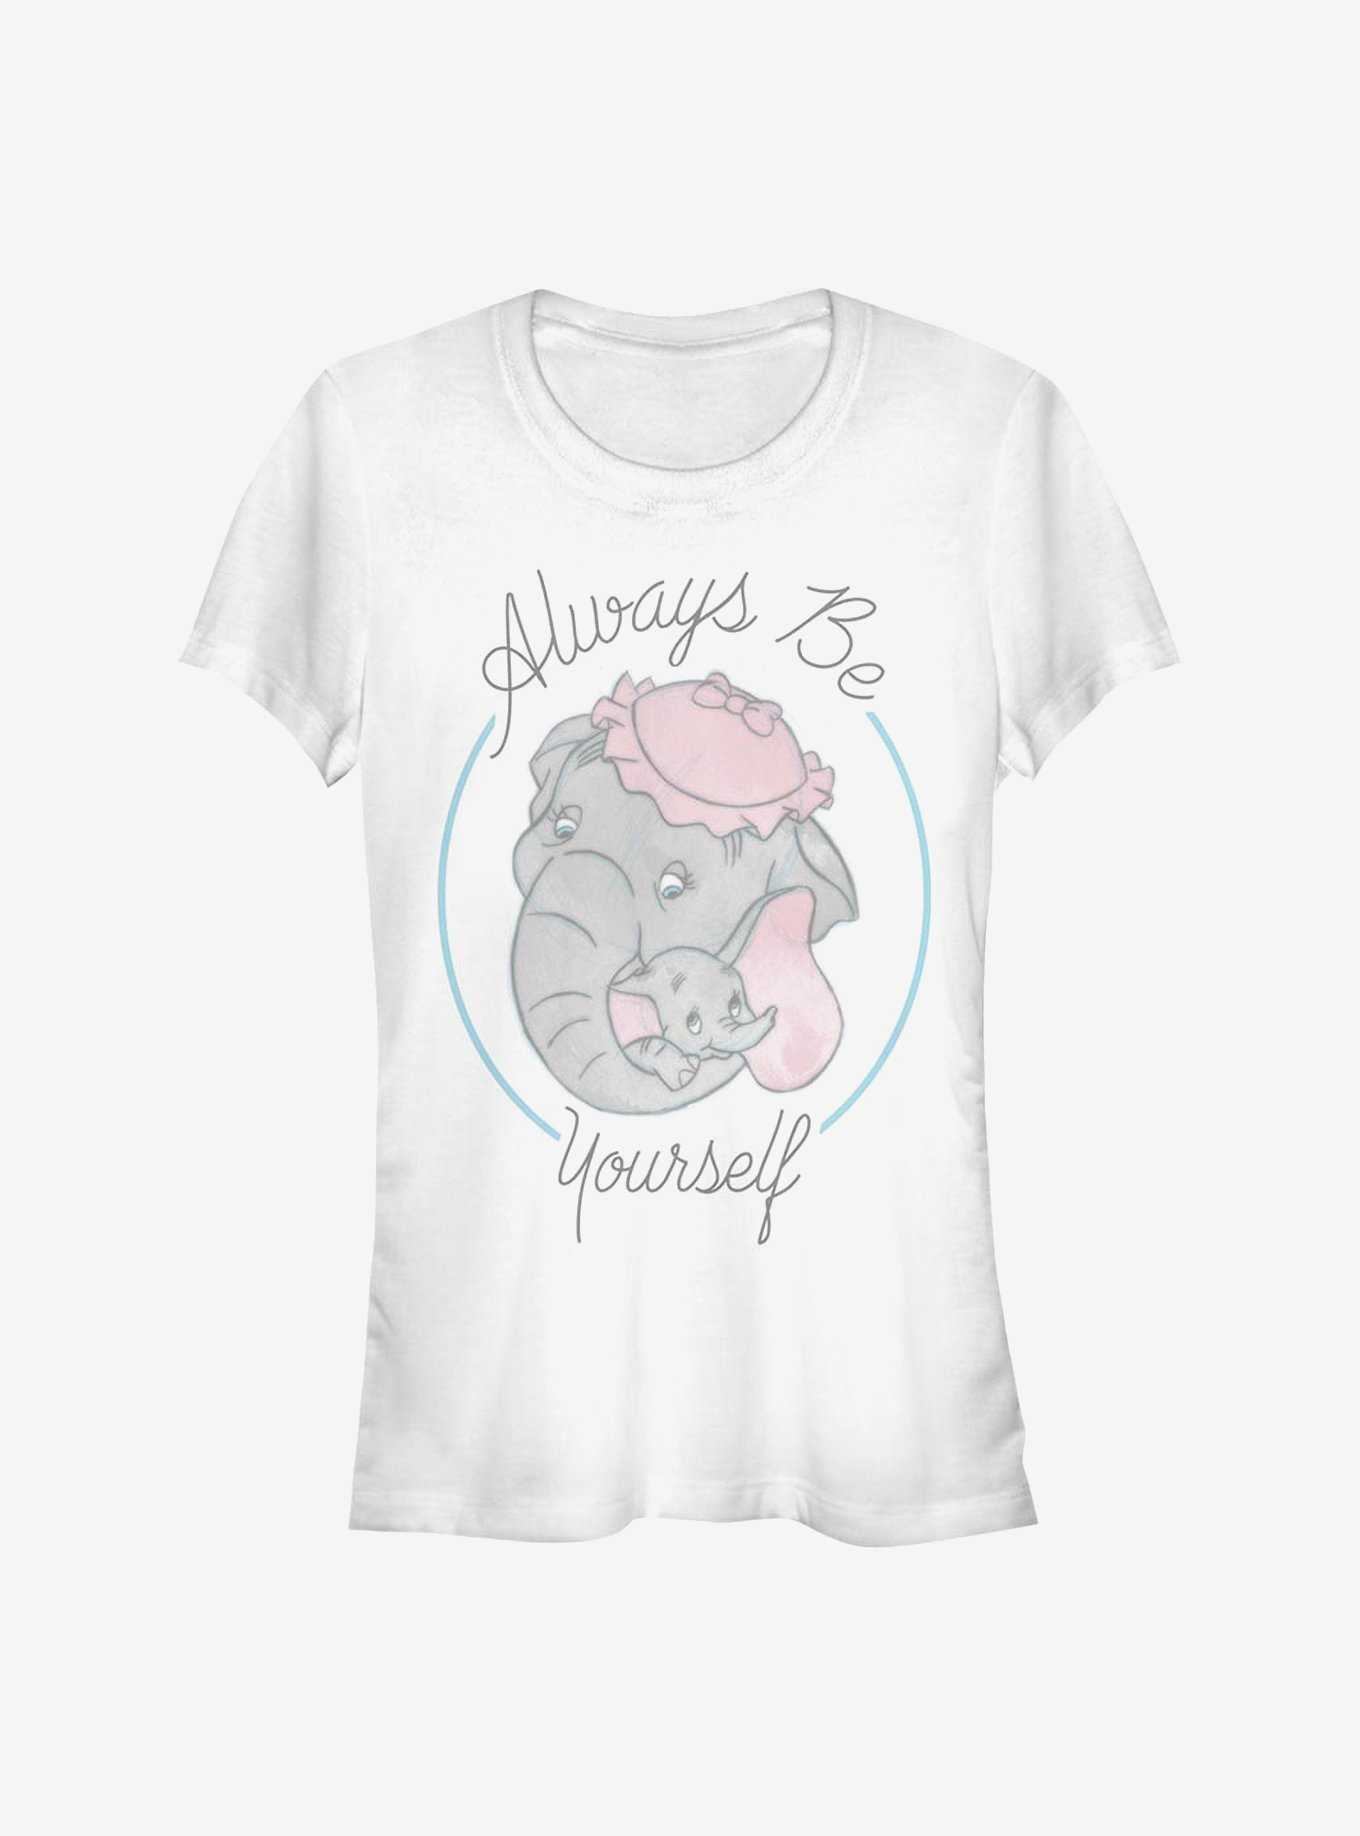 Topic & Jewelry Hot | Merchandise Dumbo Shirts, OFFICIAL